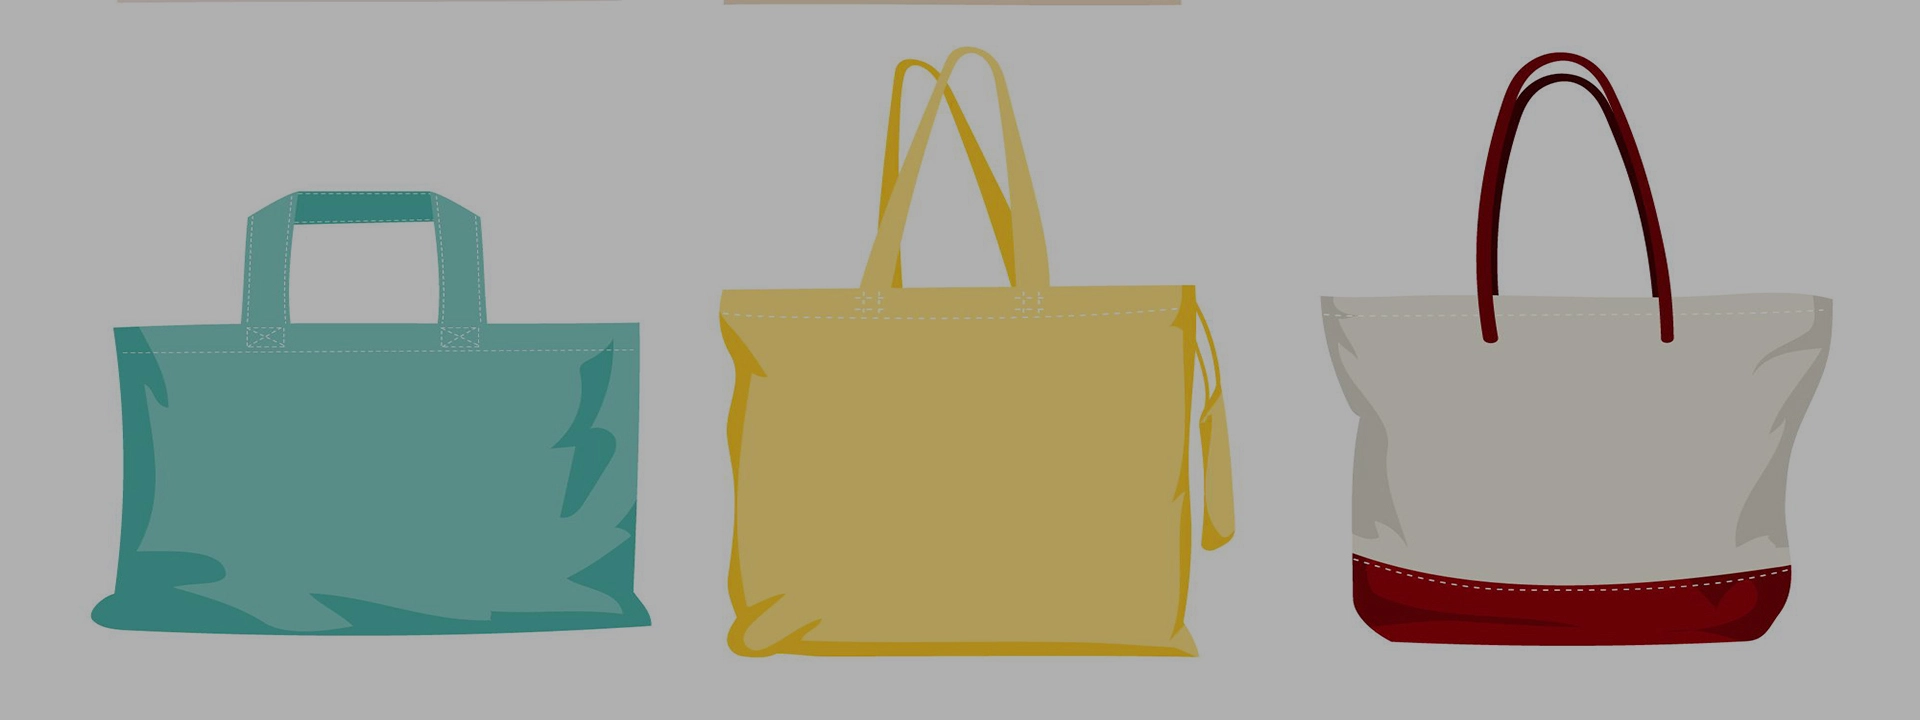 Consumer Experiences with Non-woven Insulated Tote Bags